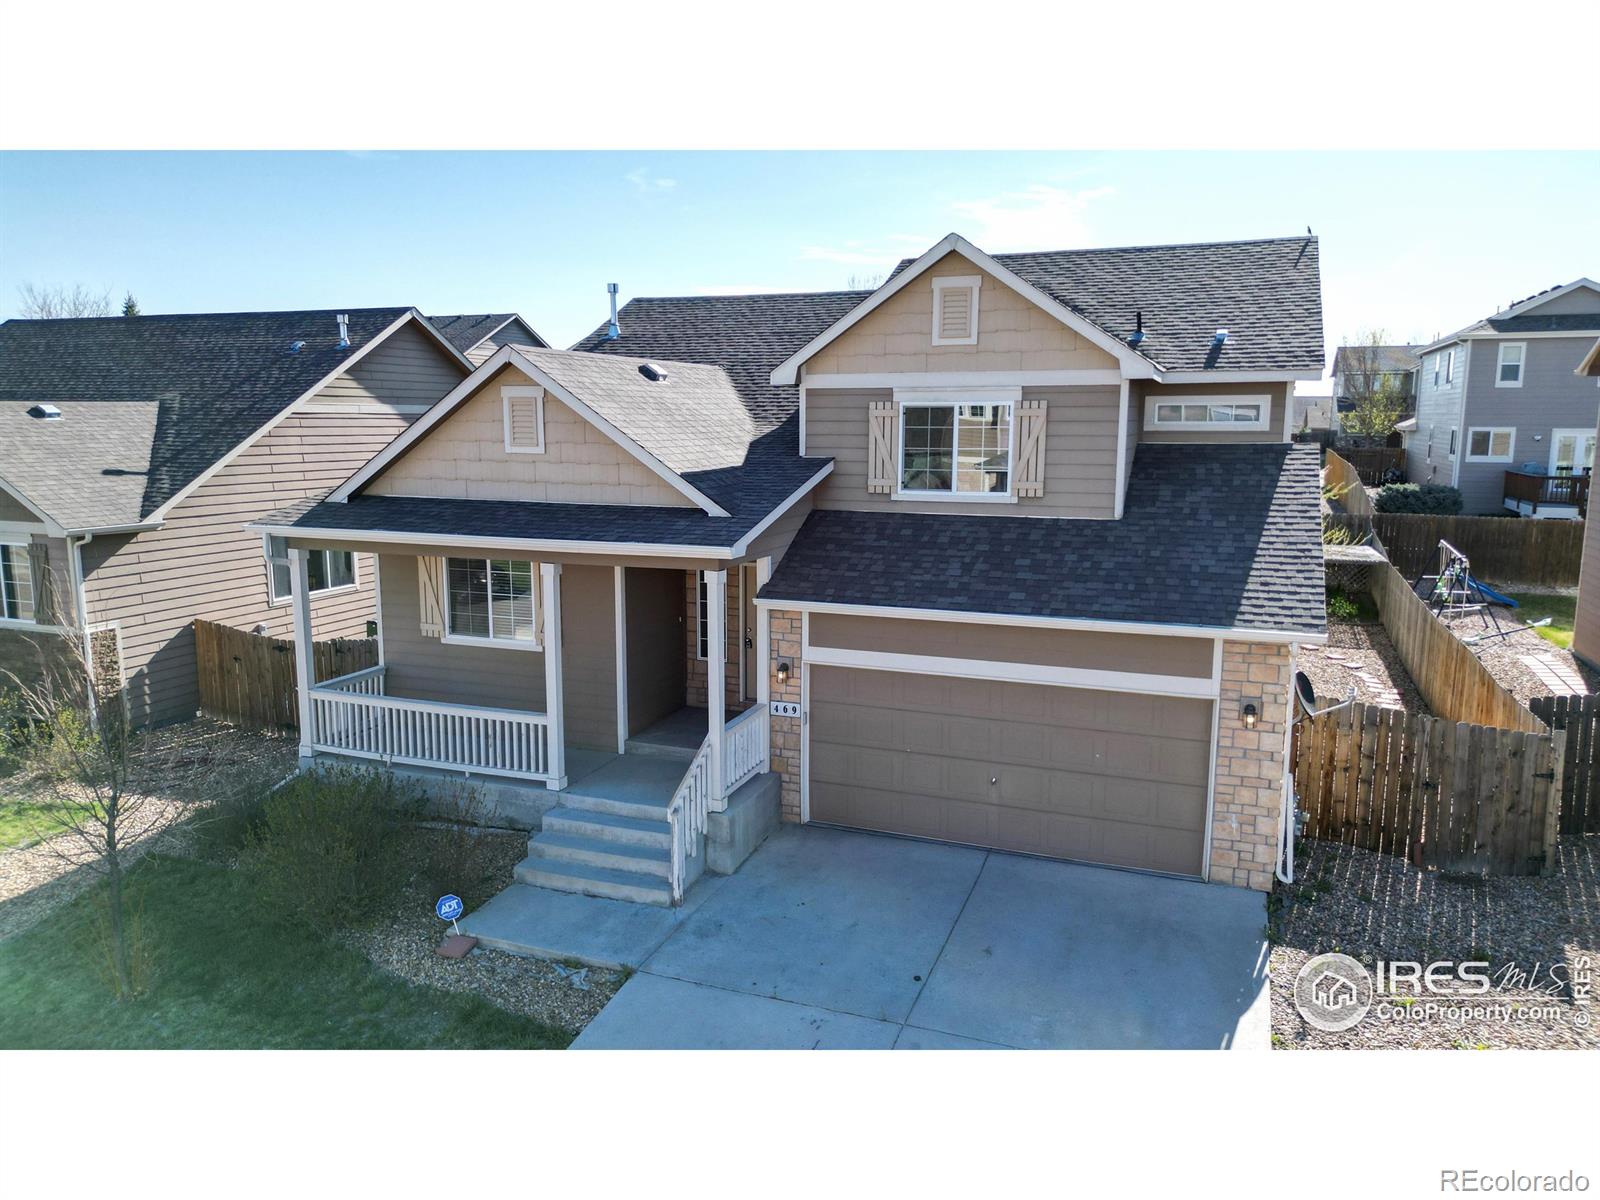 Report Image for 469  Territory Lane,Johnstown, Colorado